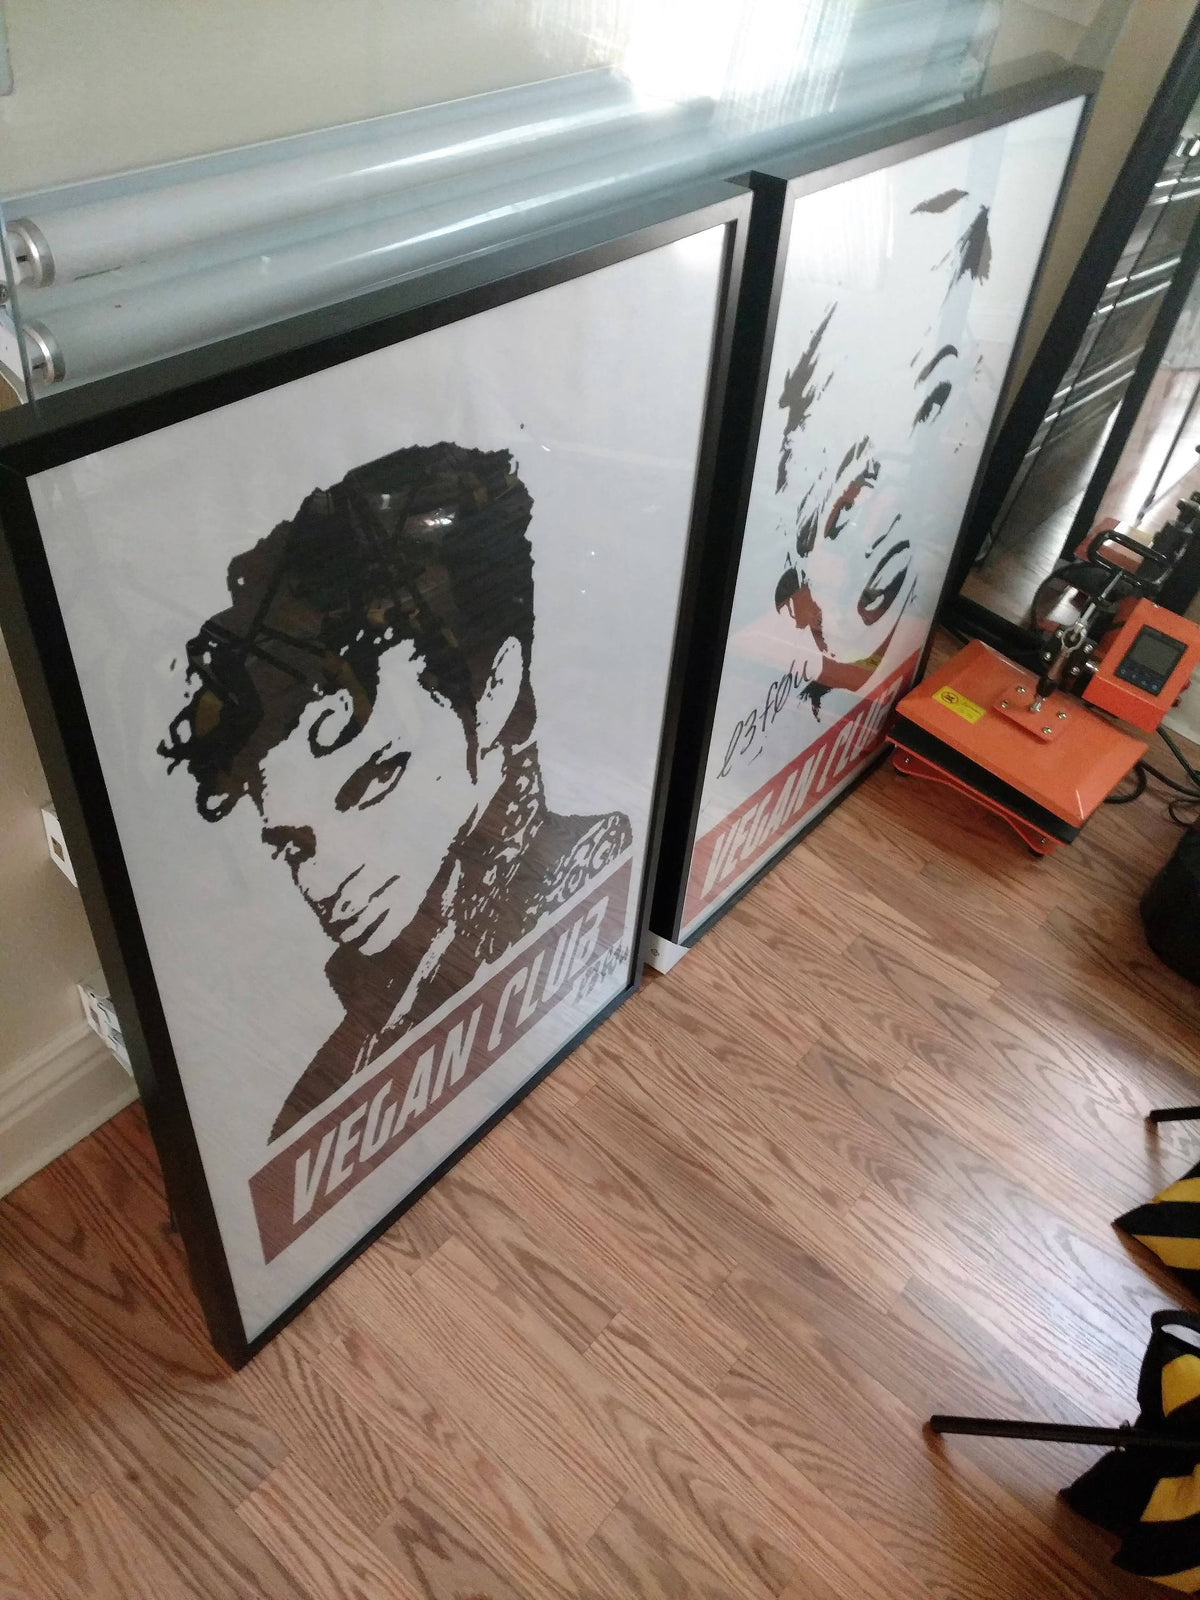 Framed on black wood Street Art NewsPrint Poster 24x36 Vegan Club featuring Prince signed by LeFou